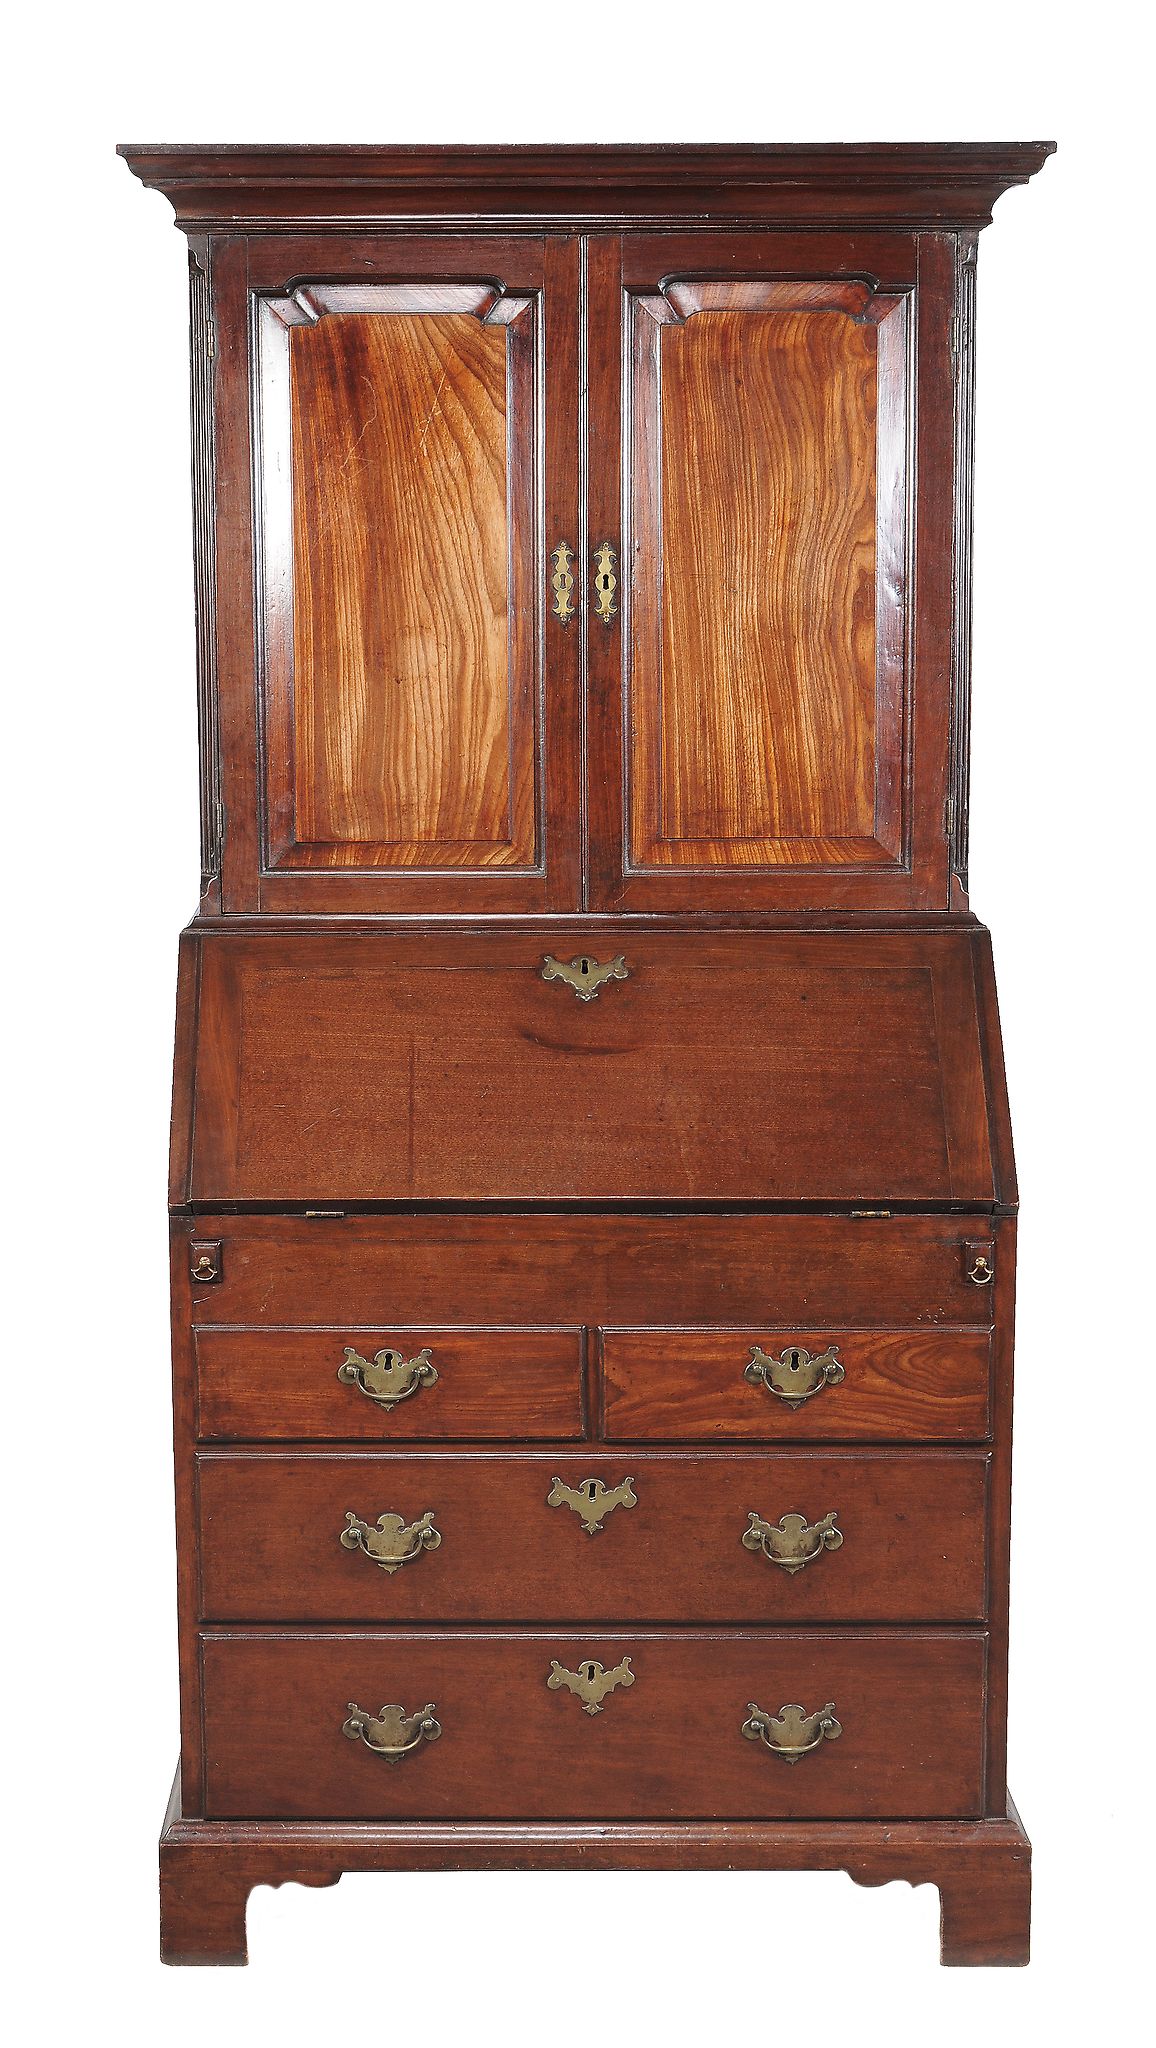 A George II mahogany bureau cabinet, circa 1750, the moulded cornice above a pair of panelled doors